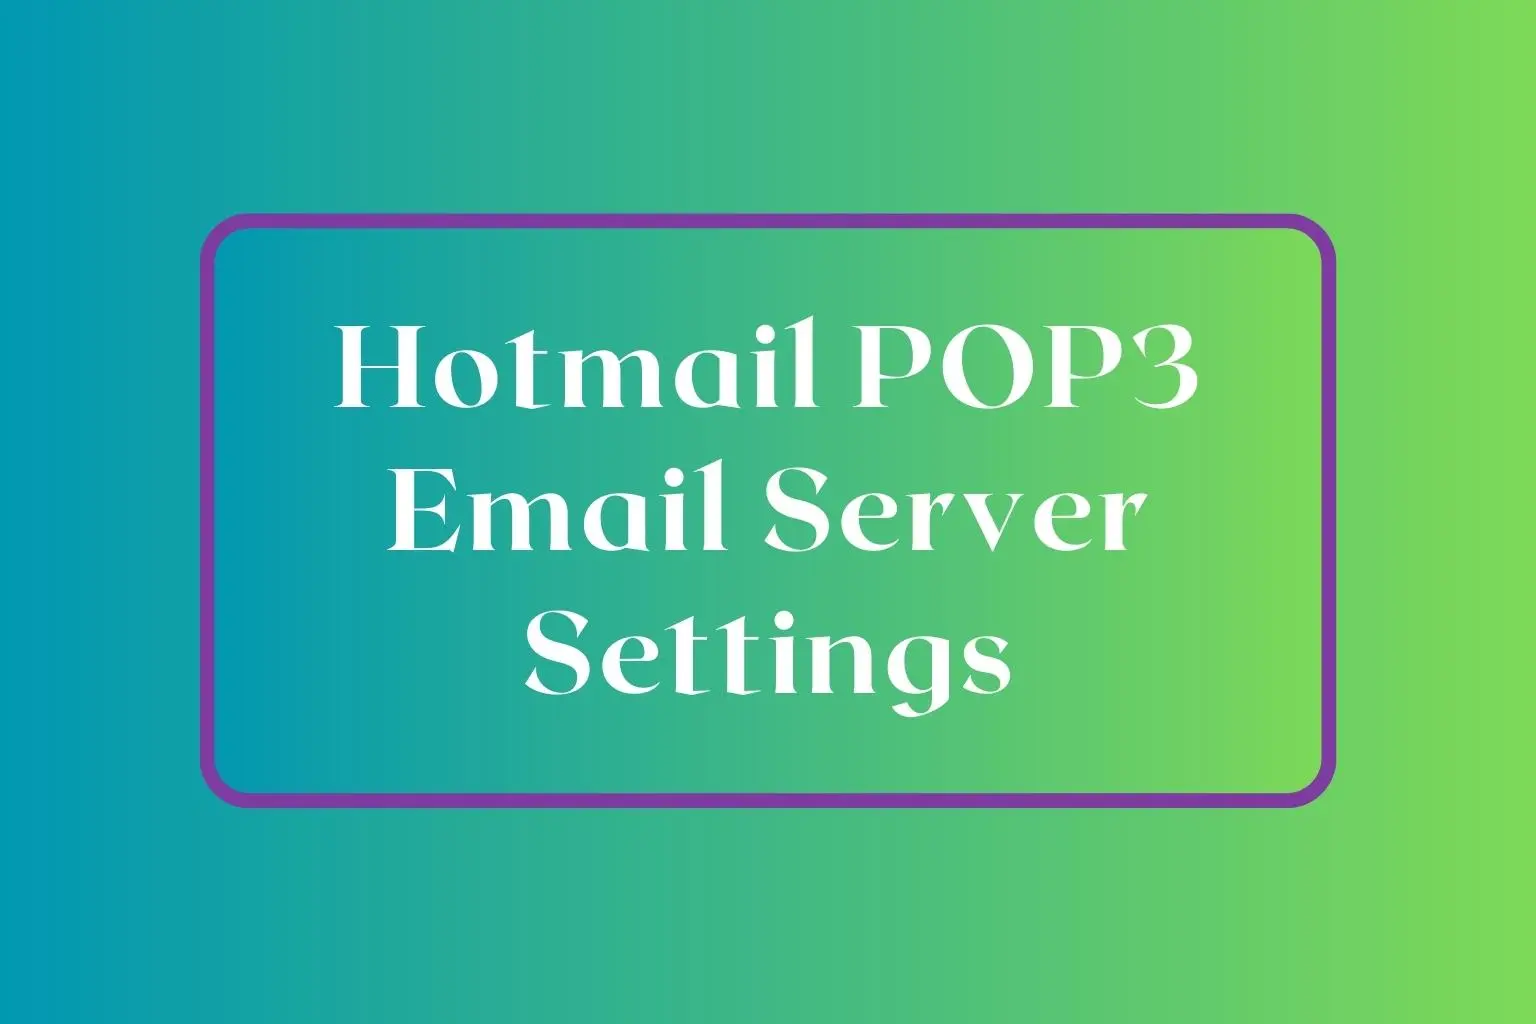 Hotmail POP3 Email Server Settings